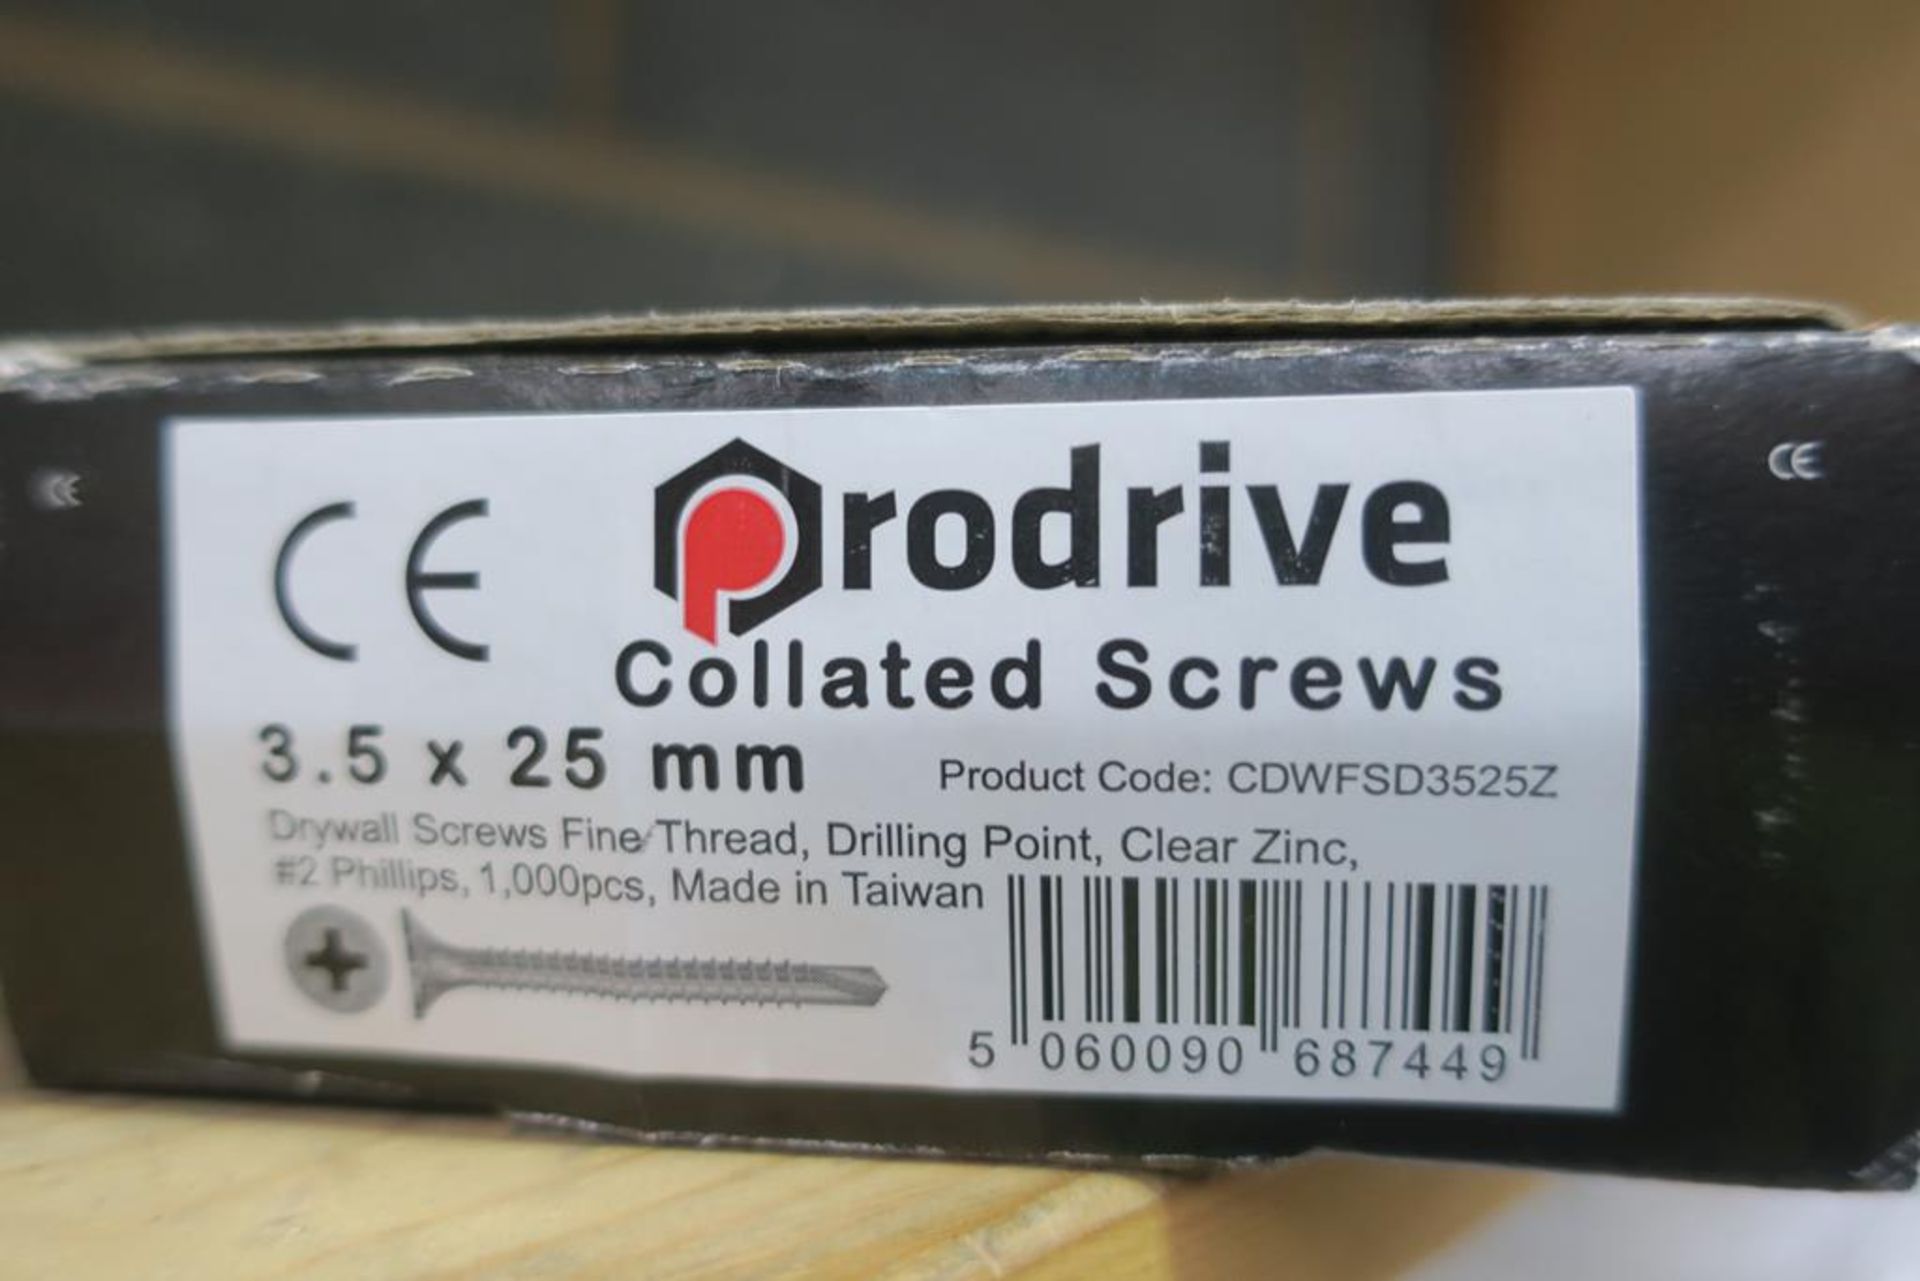 Pro Drive Collated Screws - Image 2 of 2